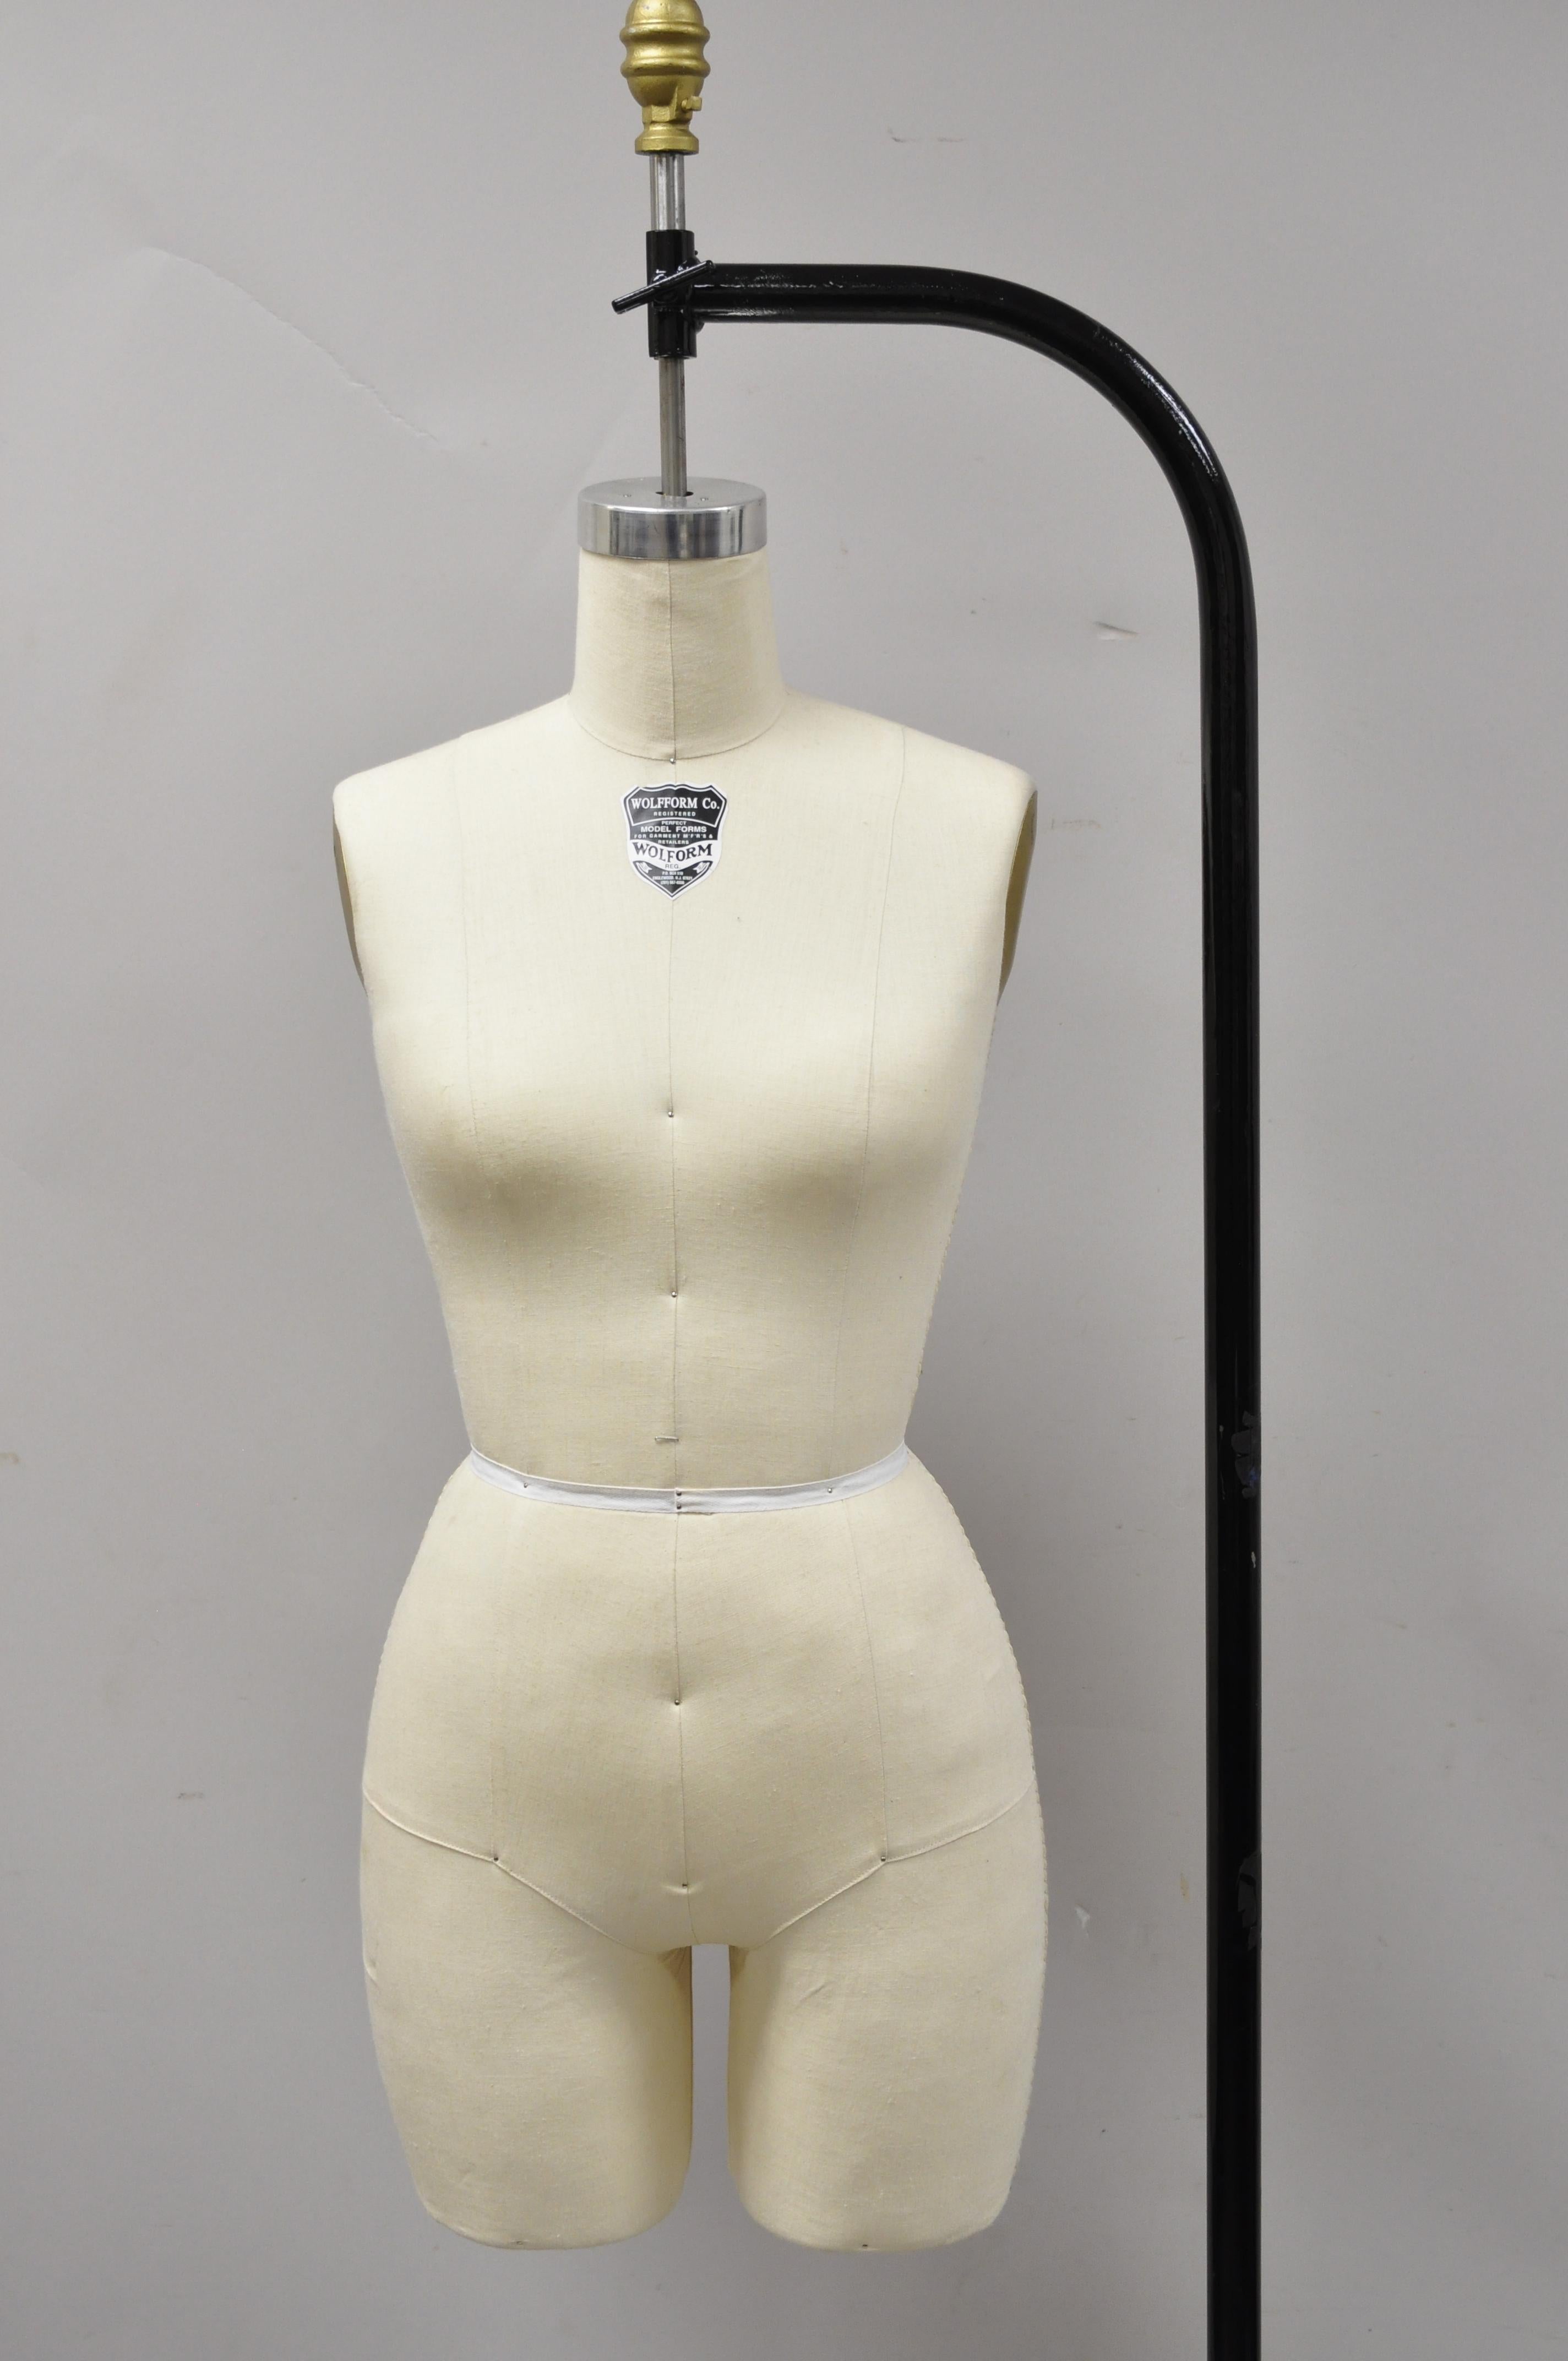 Wolf model Form & Co cast iron adjustable rolling stand dress form mannequin. Item features collapsible shoulders, adjustable height, rolling base, cast iron stand, circa late 20th century. Measurements: 69